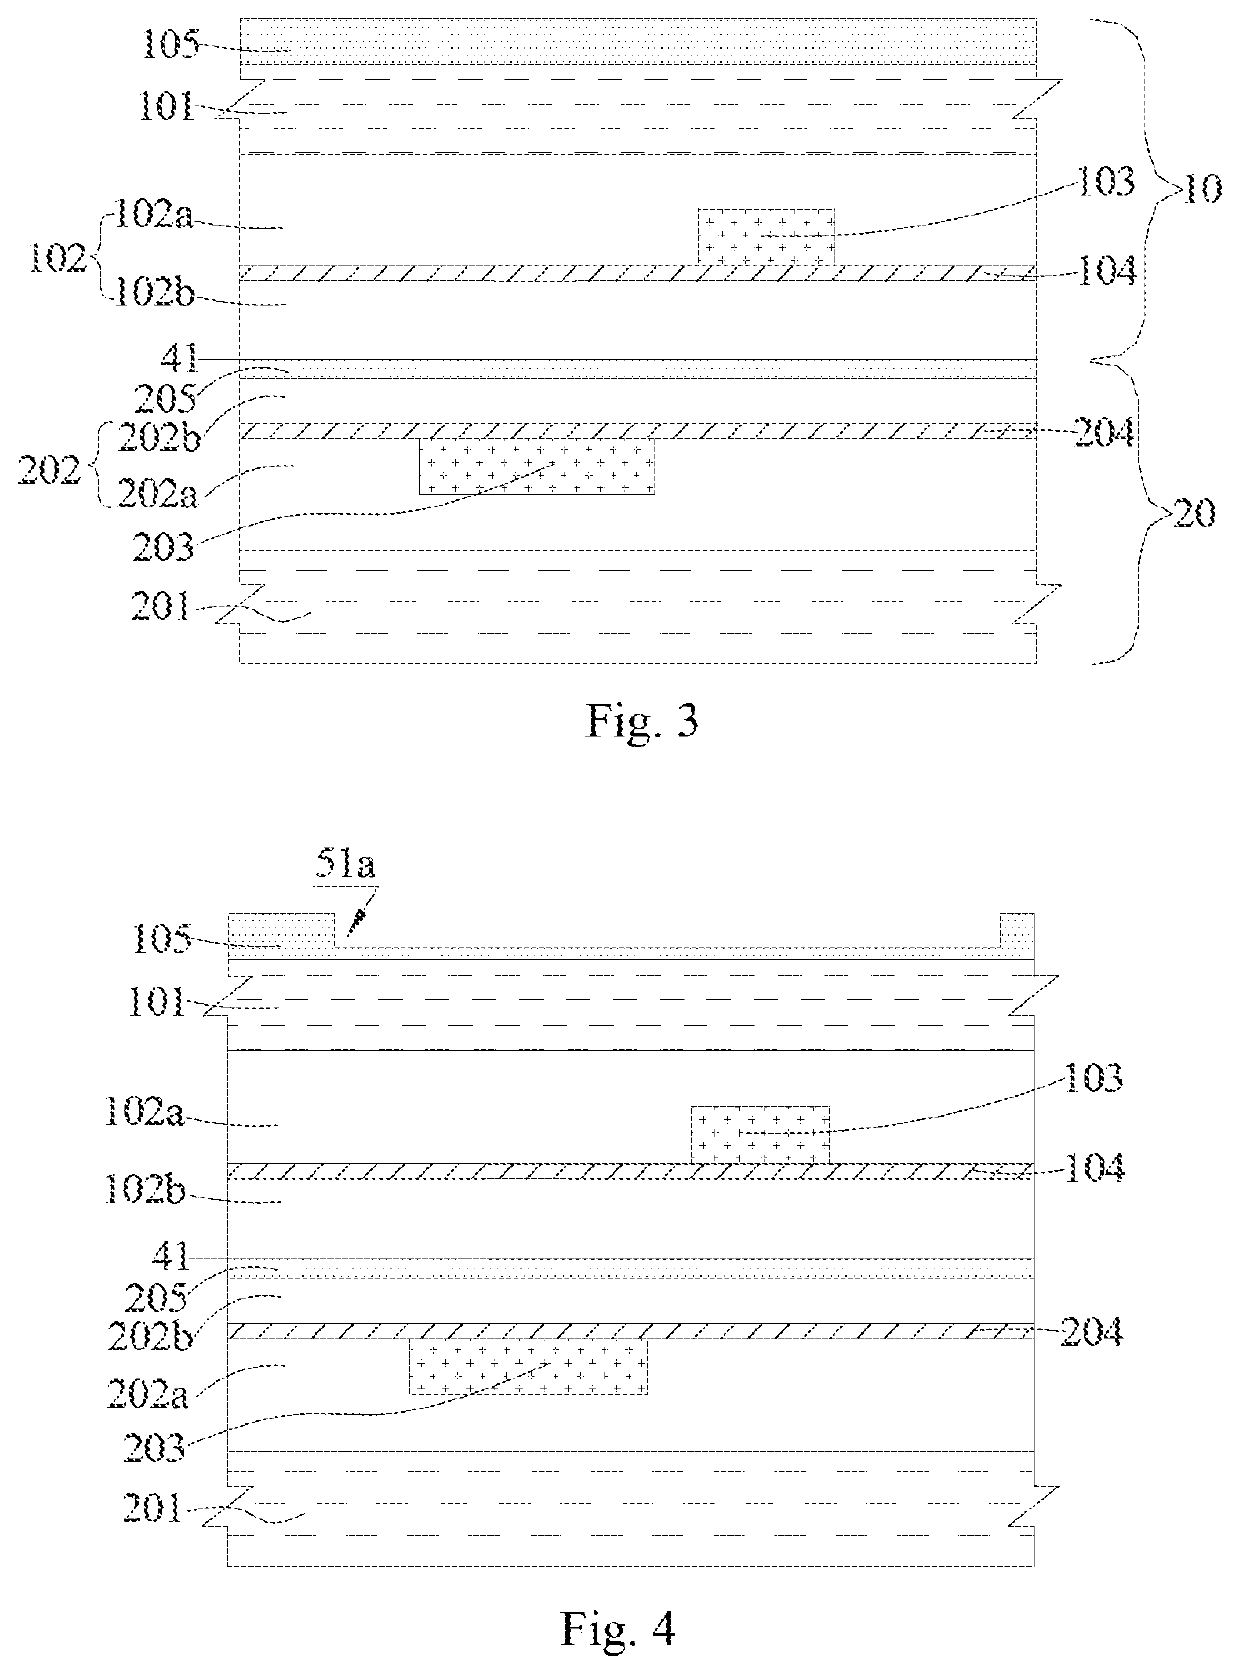 Multi-wafer stacking structure and fabrication method thereof